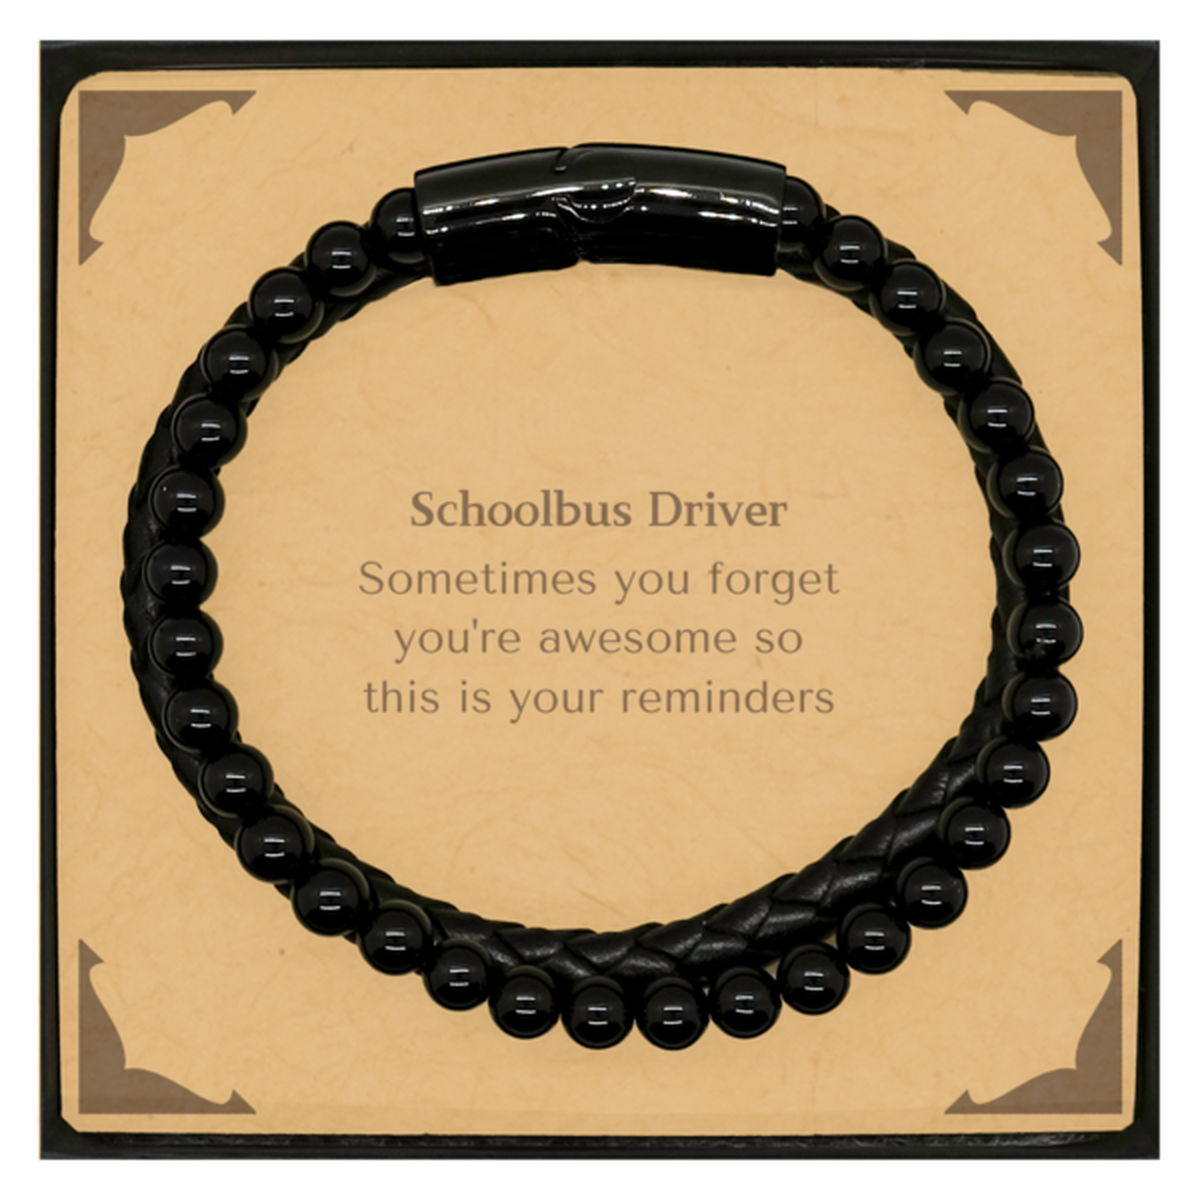 Sentimental Schoolbus Driver Stone Leather Bracelets, Schoolbus Driver Sometimes you forget you're awesome so this is your reminders, Graduation Christmas Birthday Gifts for Schoolbus Driver, Men, Women, Coworkers